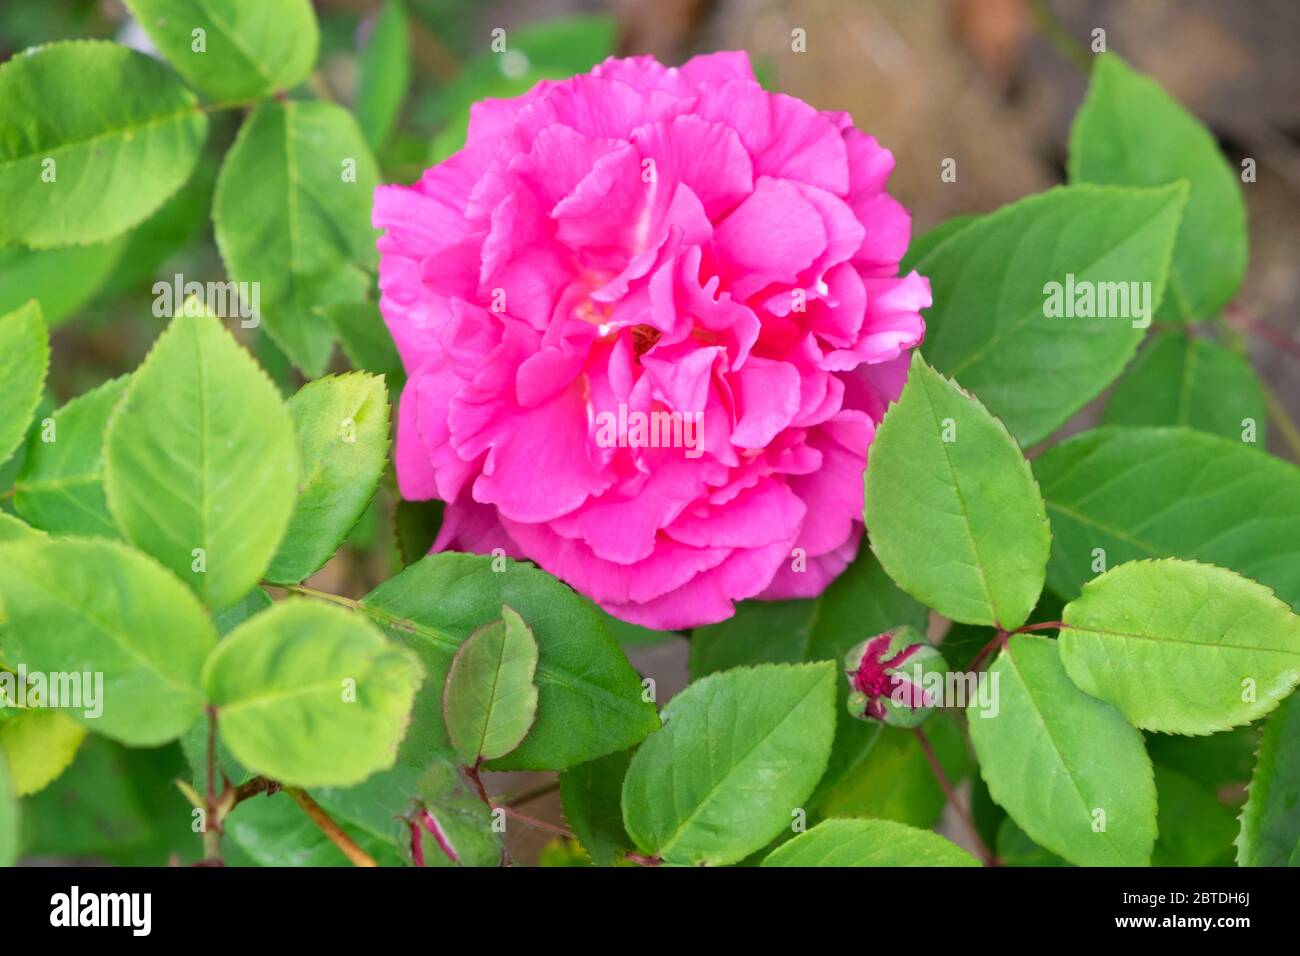 Zephiriine Drouhin pink rose closeup close-up view in bloom in a garden in May Carmarthenshire Wales UK Great Britain  KATHY DEWITT Stock Photo